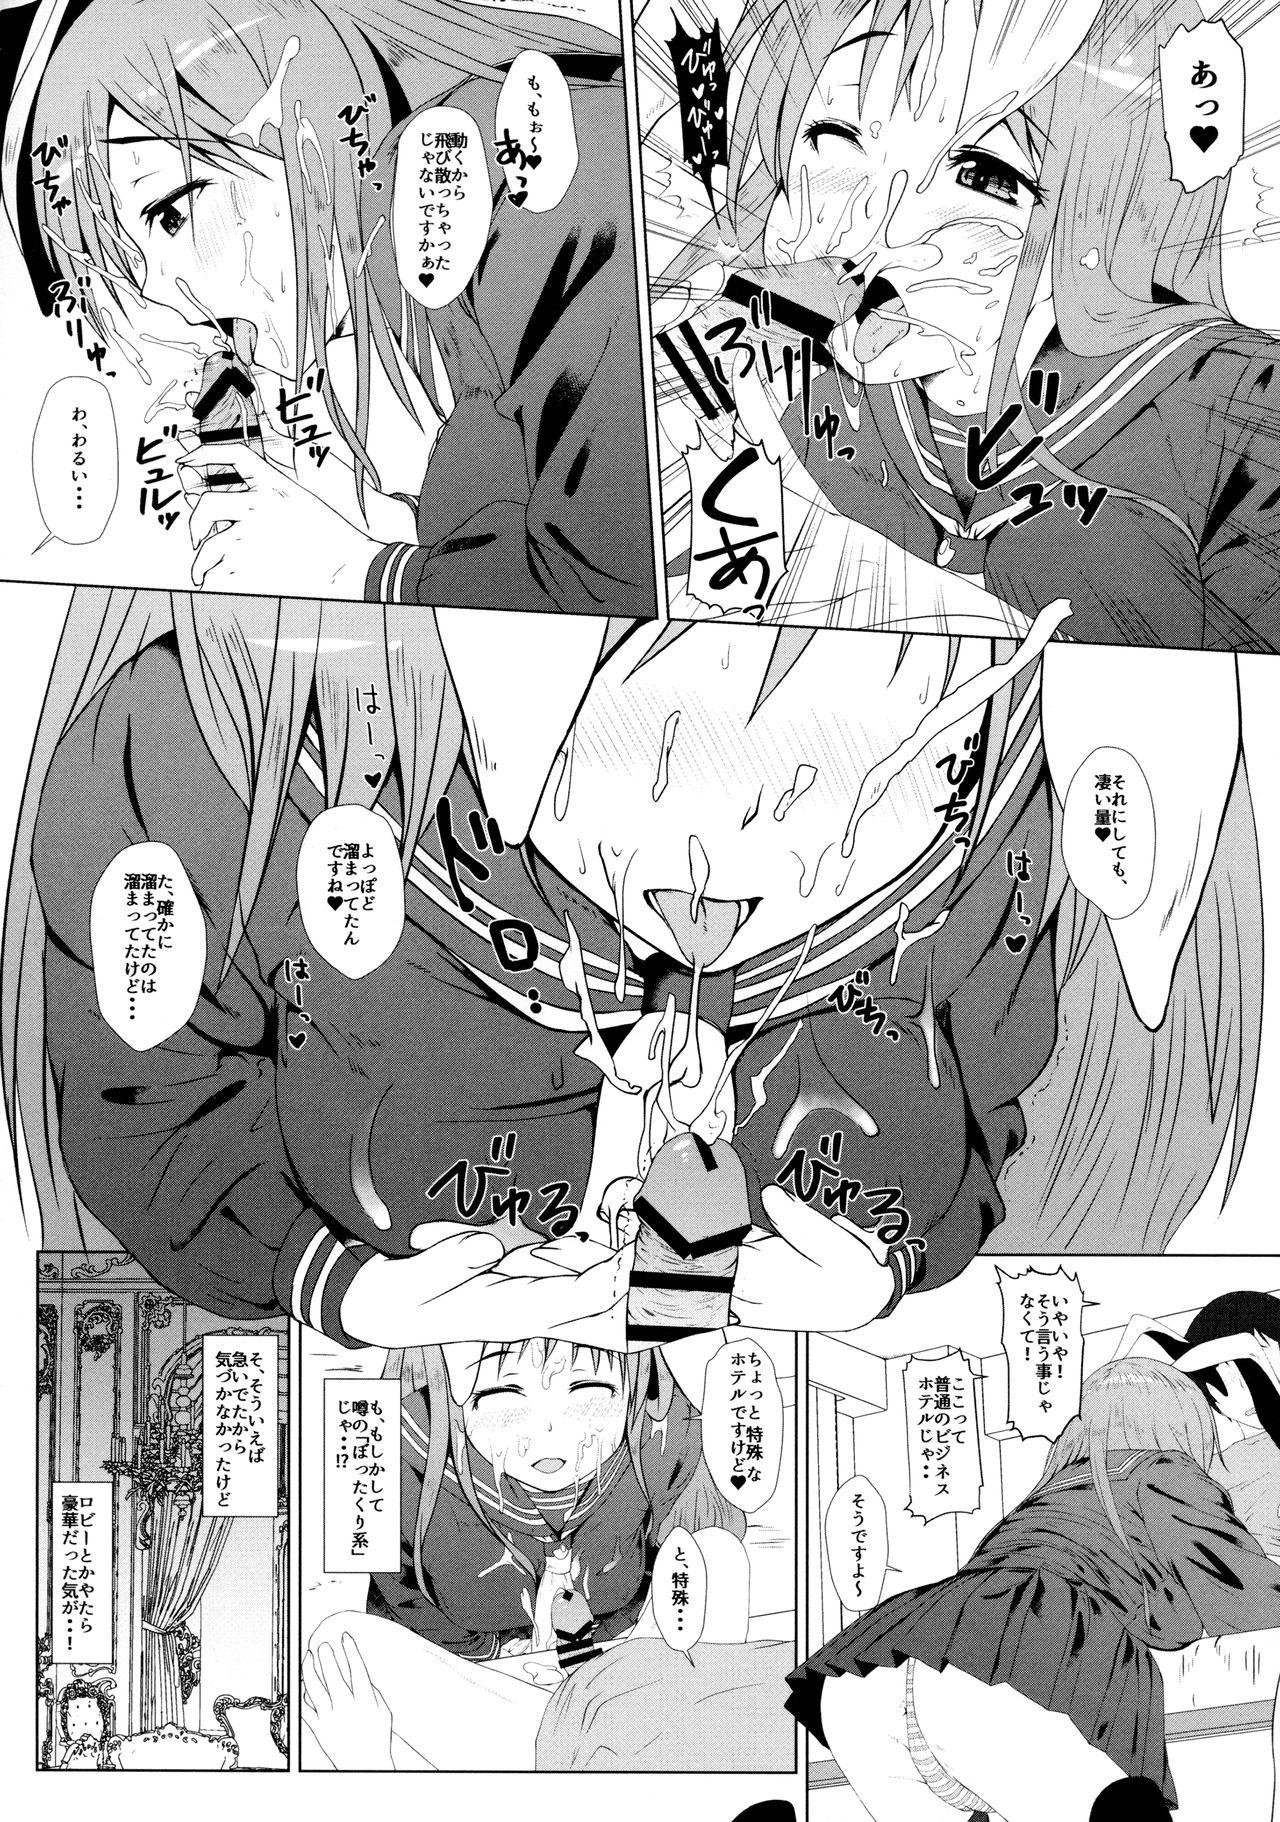 Fun Udonge Inn ni Youkoso - Welcome to UDONGE Inn!! - Touhou project Mask - Page 3